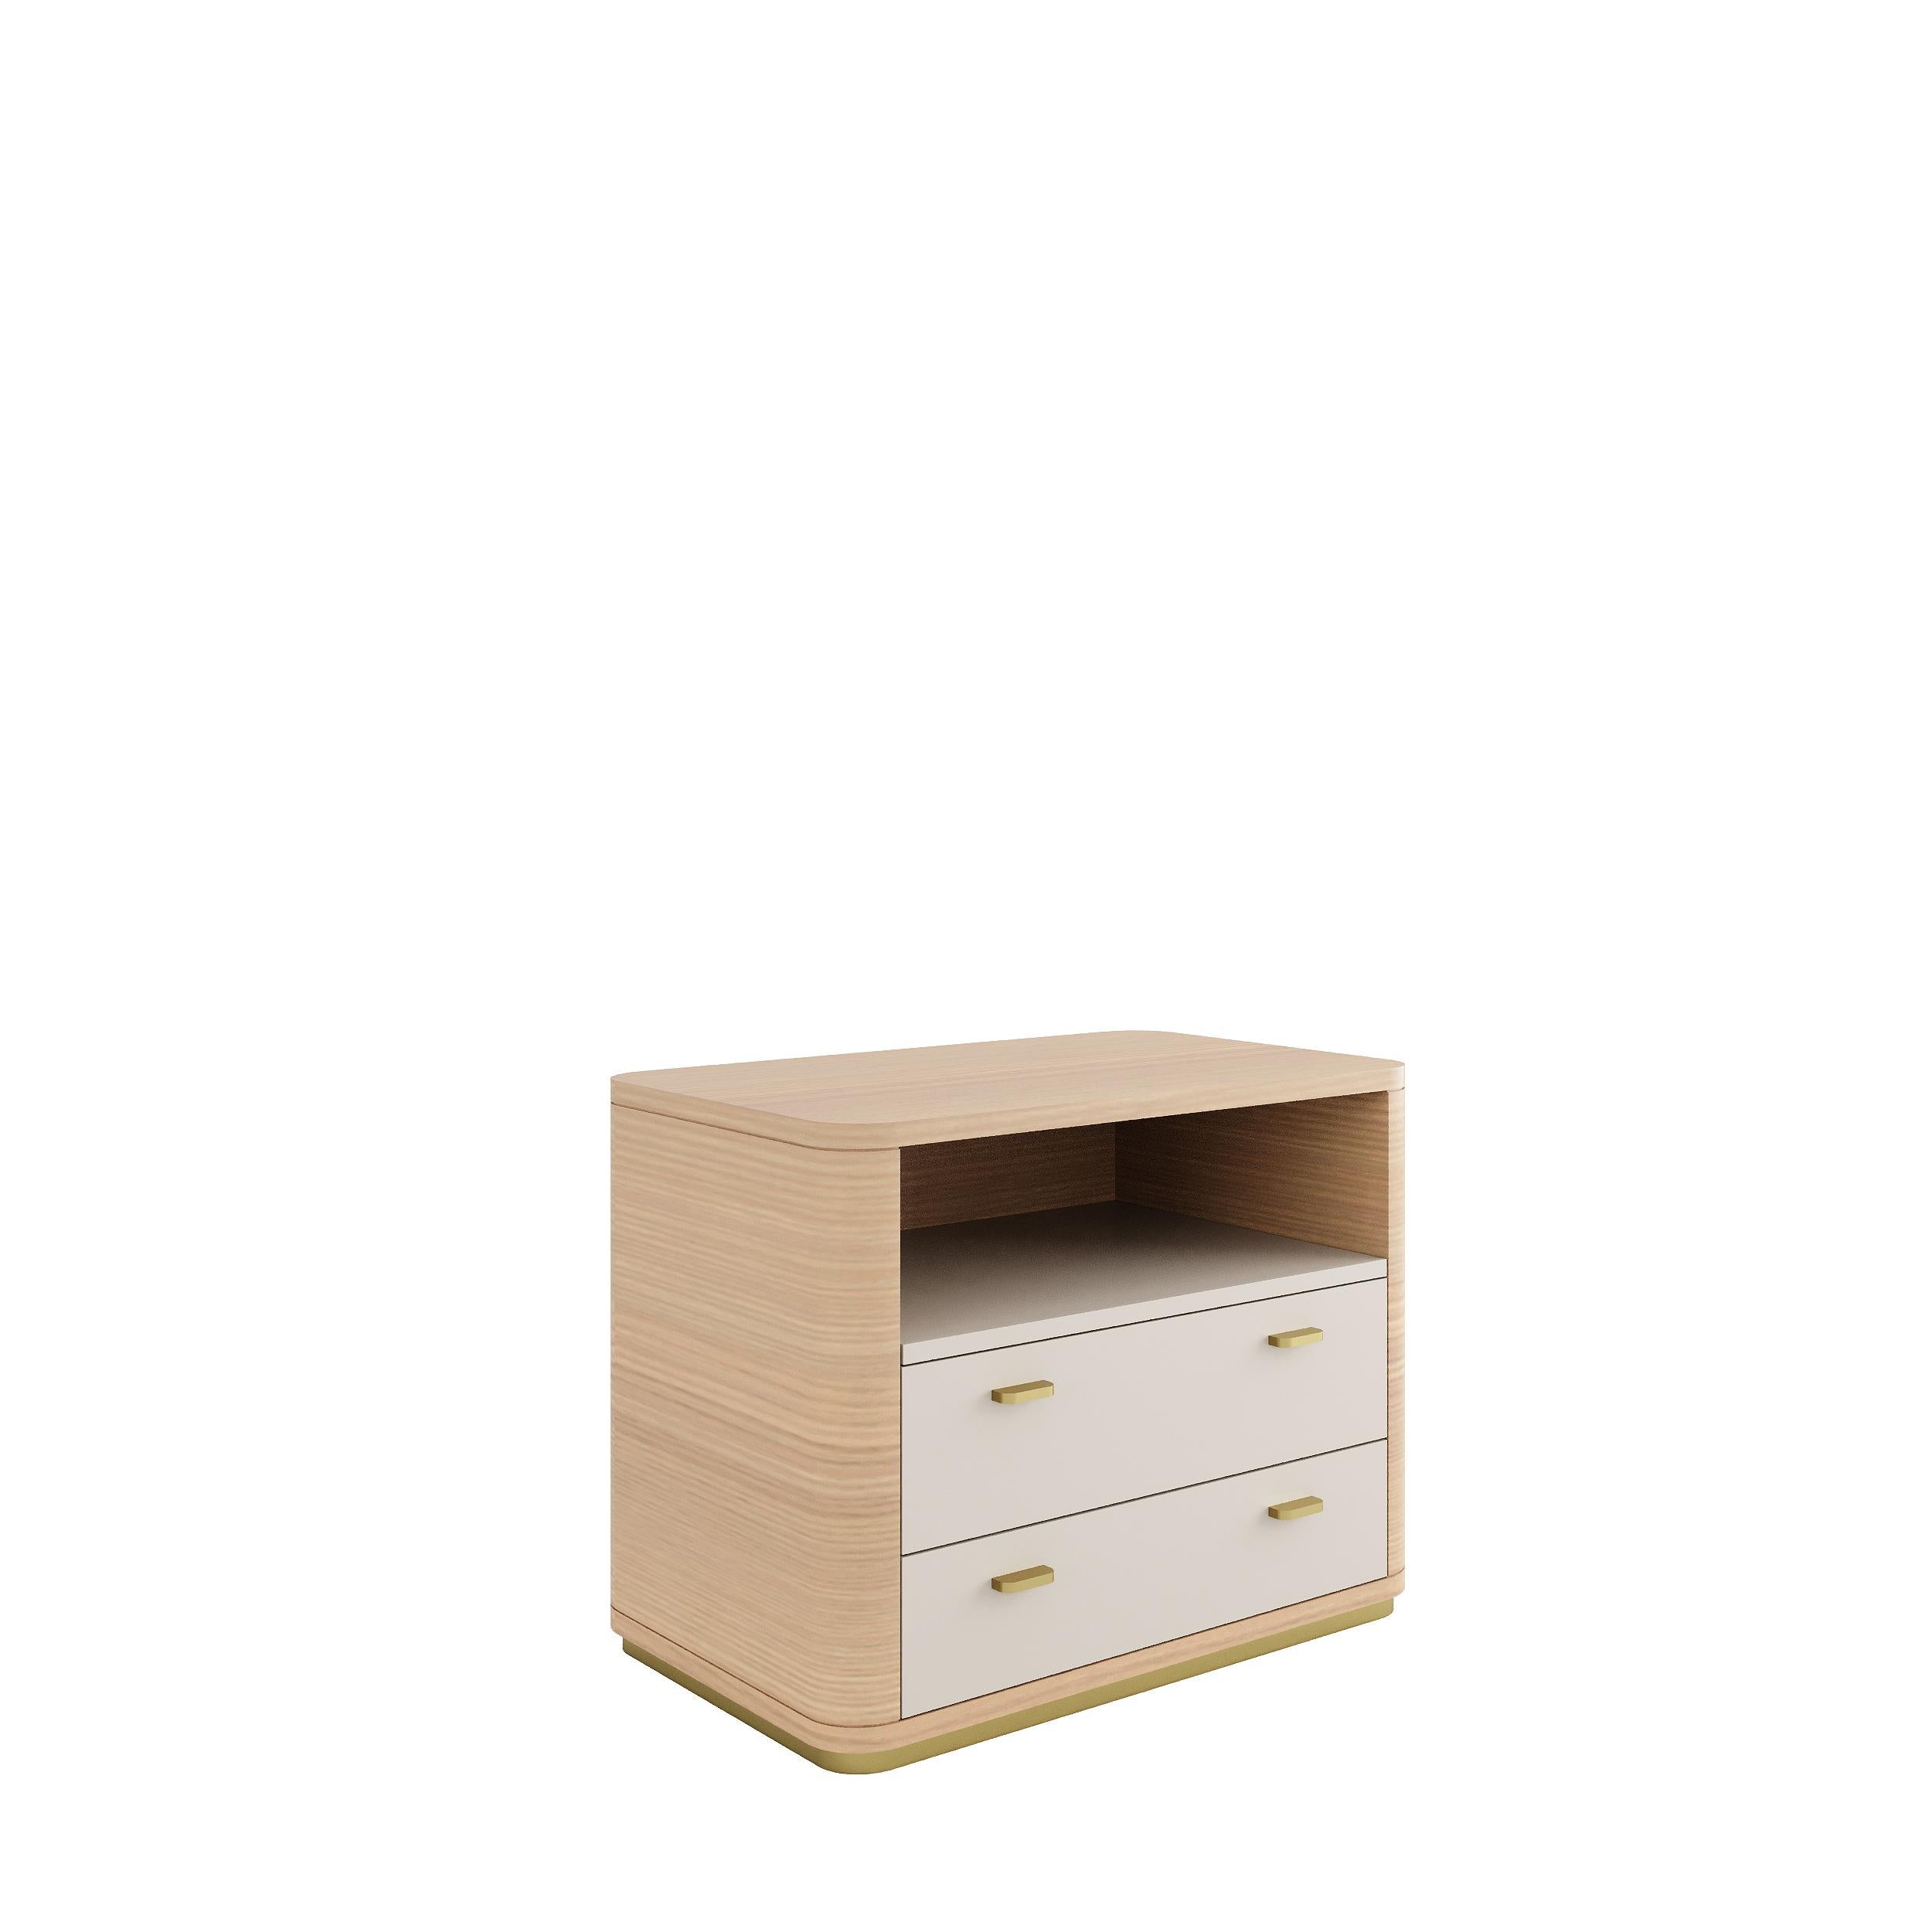 Portuguese CRIS II Nightstand - 2 drawers For Sale